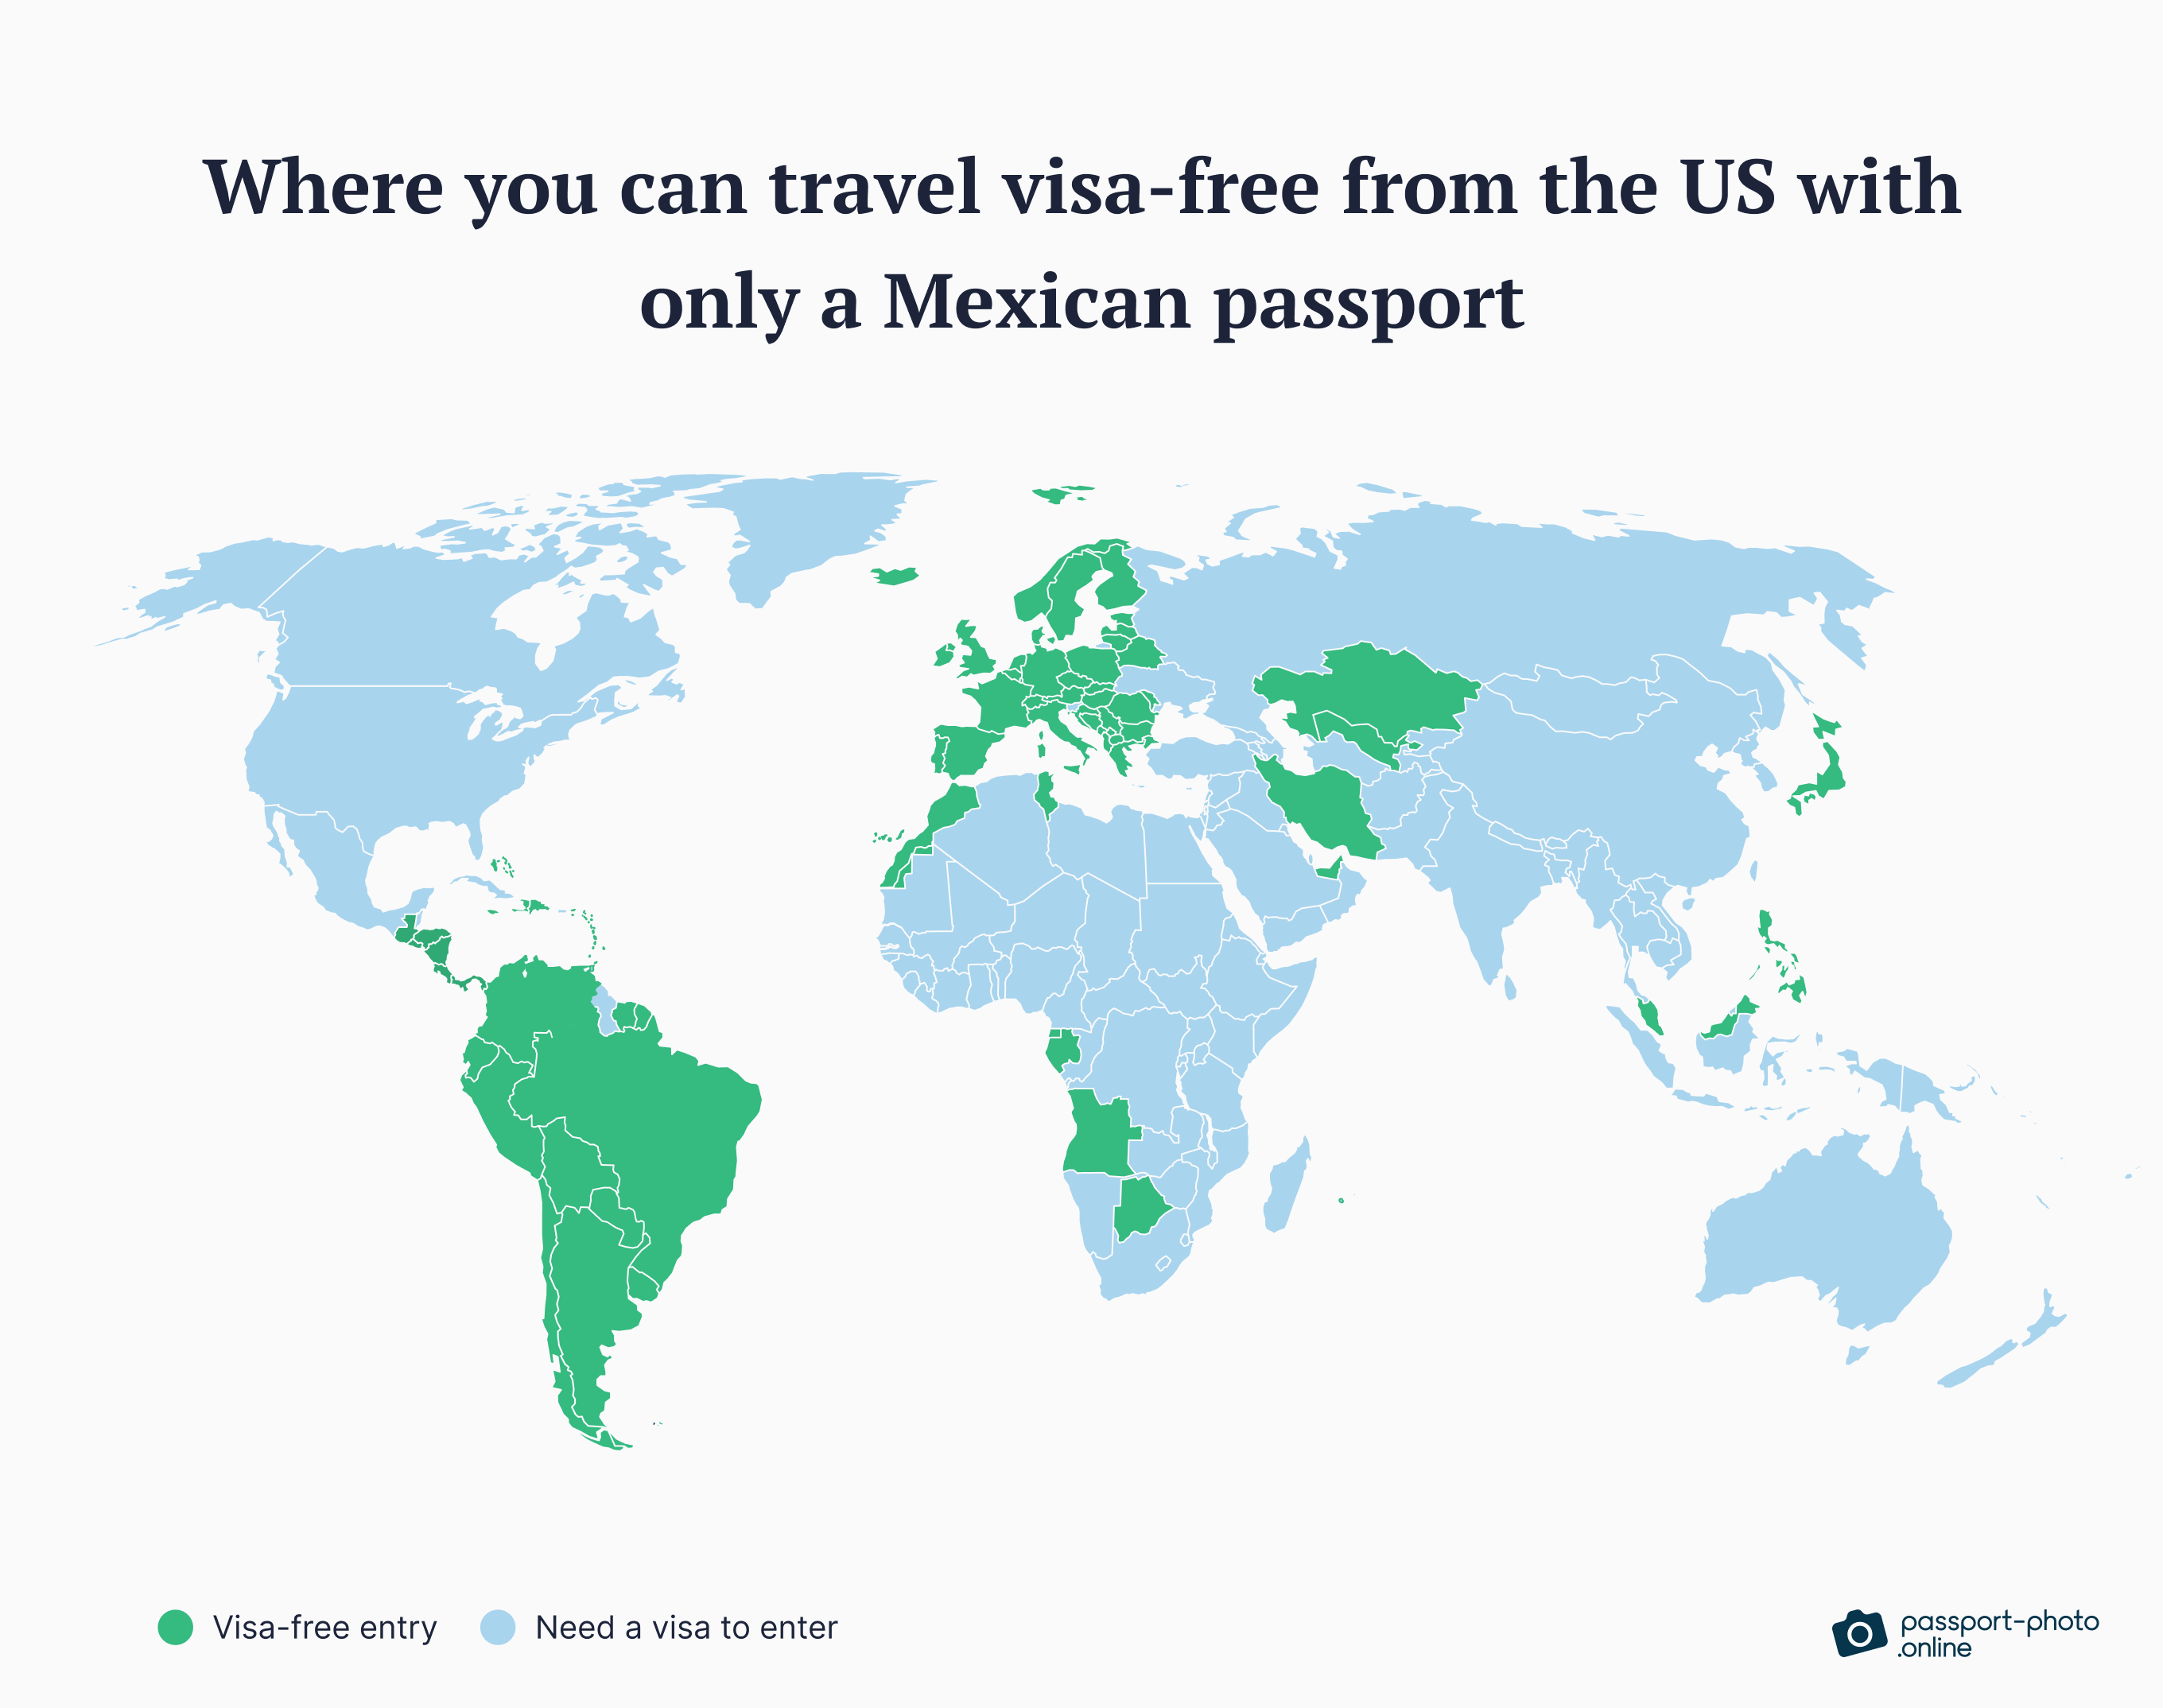 A list of other countries you can travel to visa-free using only your Mexican passport to leave the US.